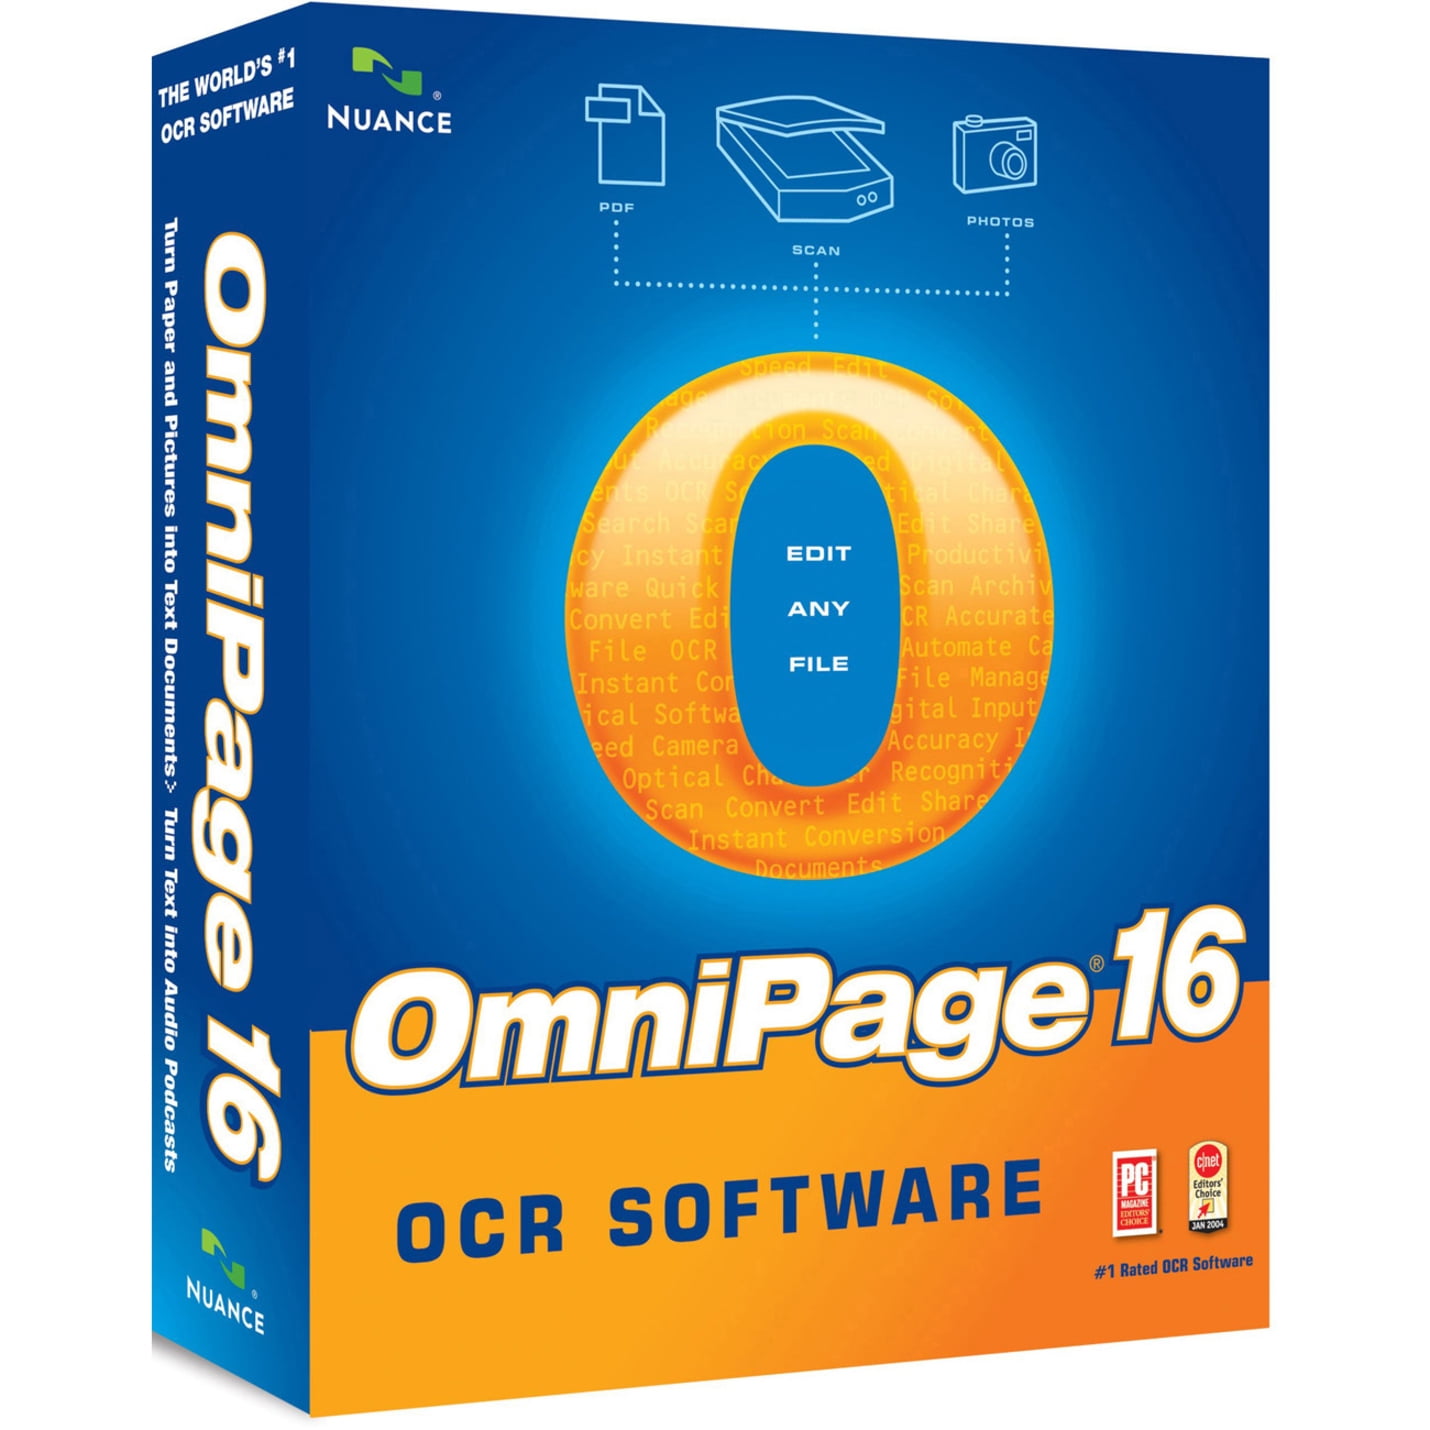 omnipage software free download 4 shared